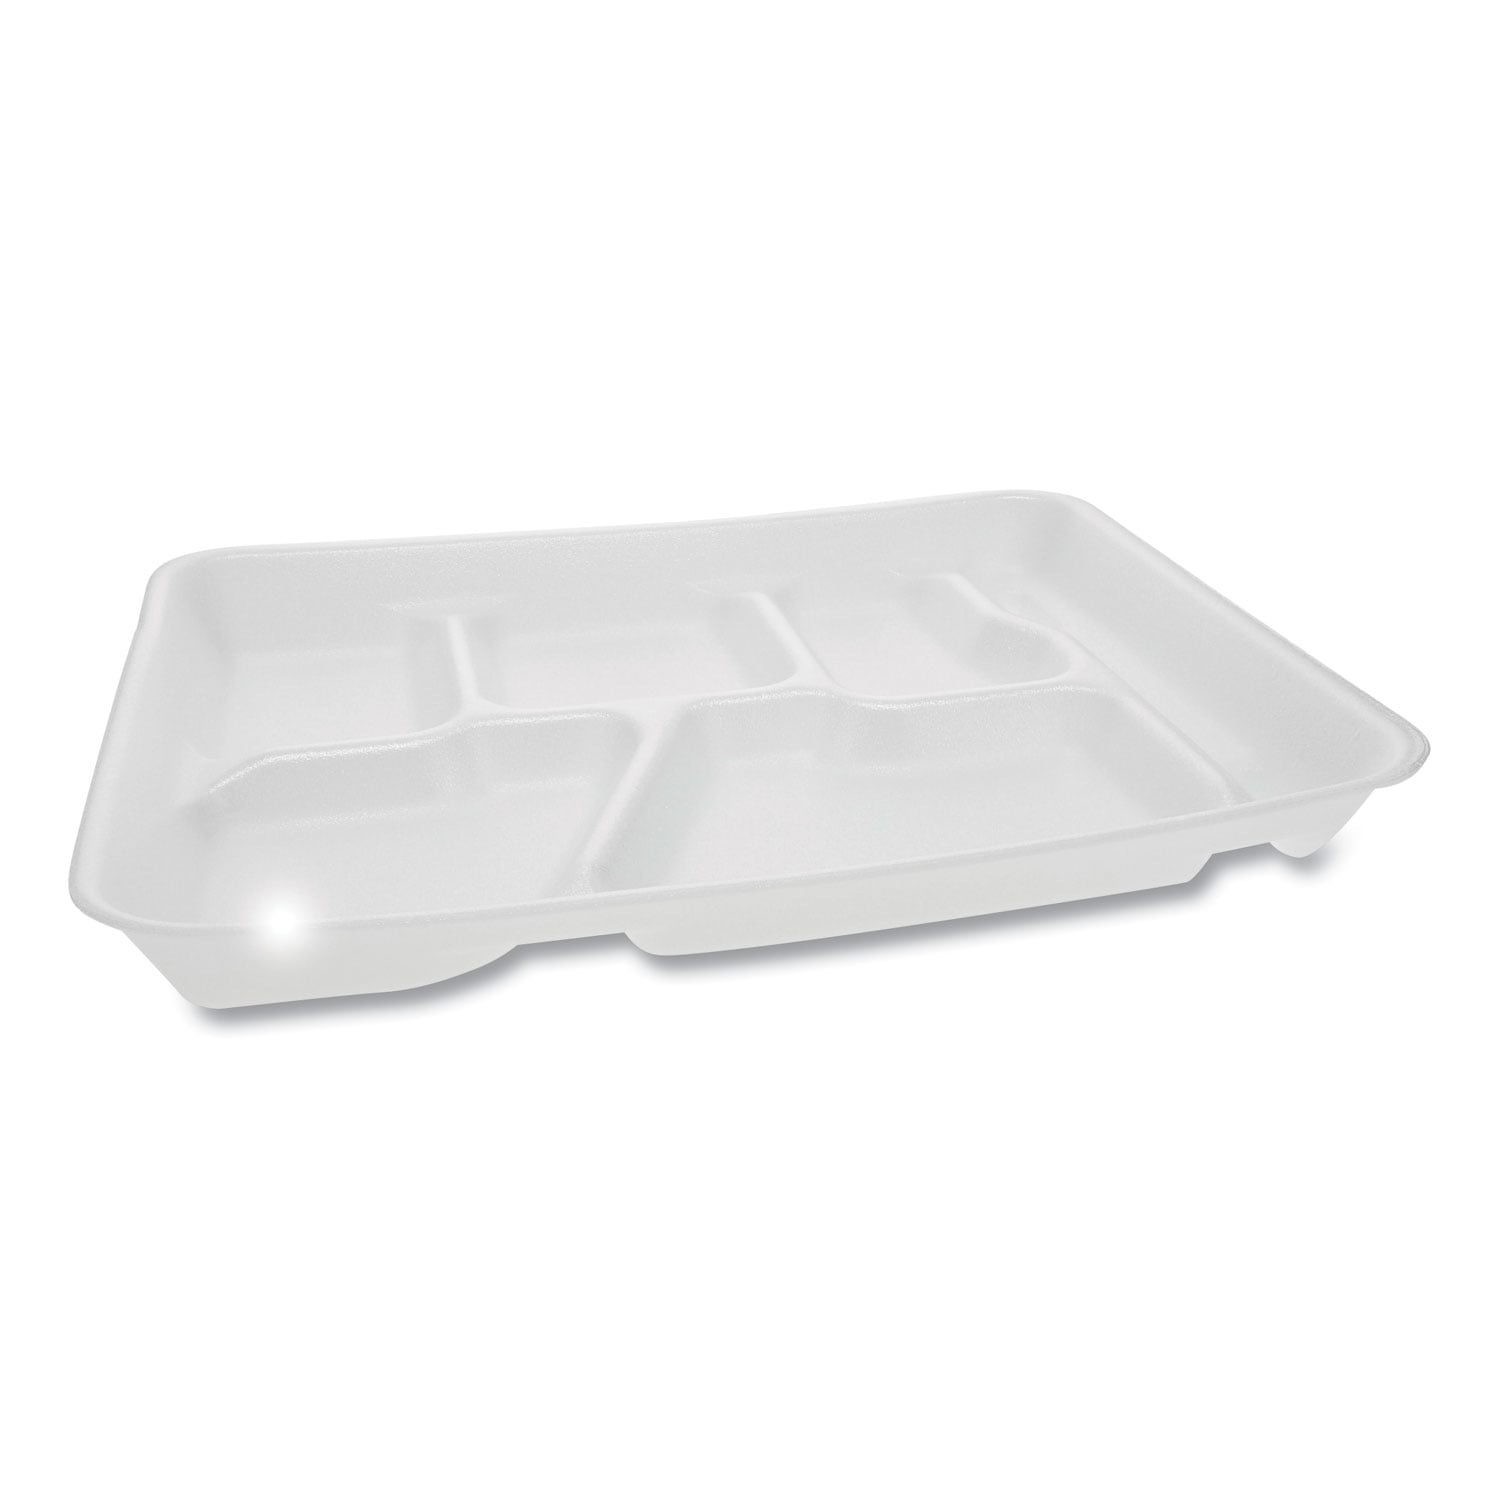 Crafts Foam Trays, White Foam Meat Tray Paint and Ink Mixing Trays Food Tray School Printmaking Trays for DIY Crafts 8 1/4 x 5 3/8 Plus Depth of